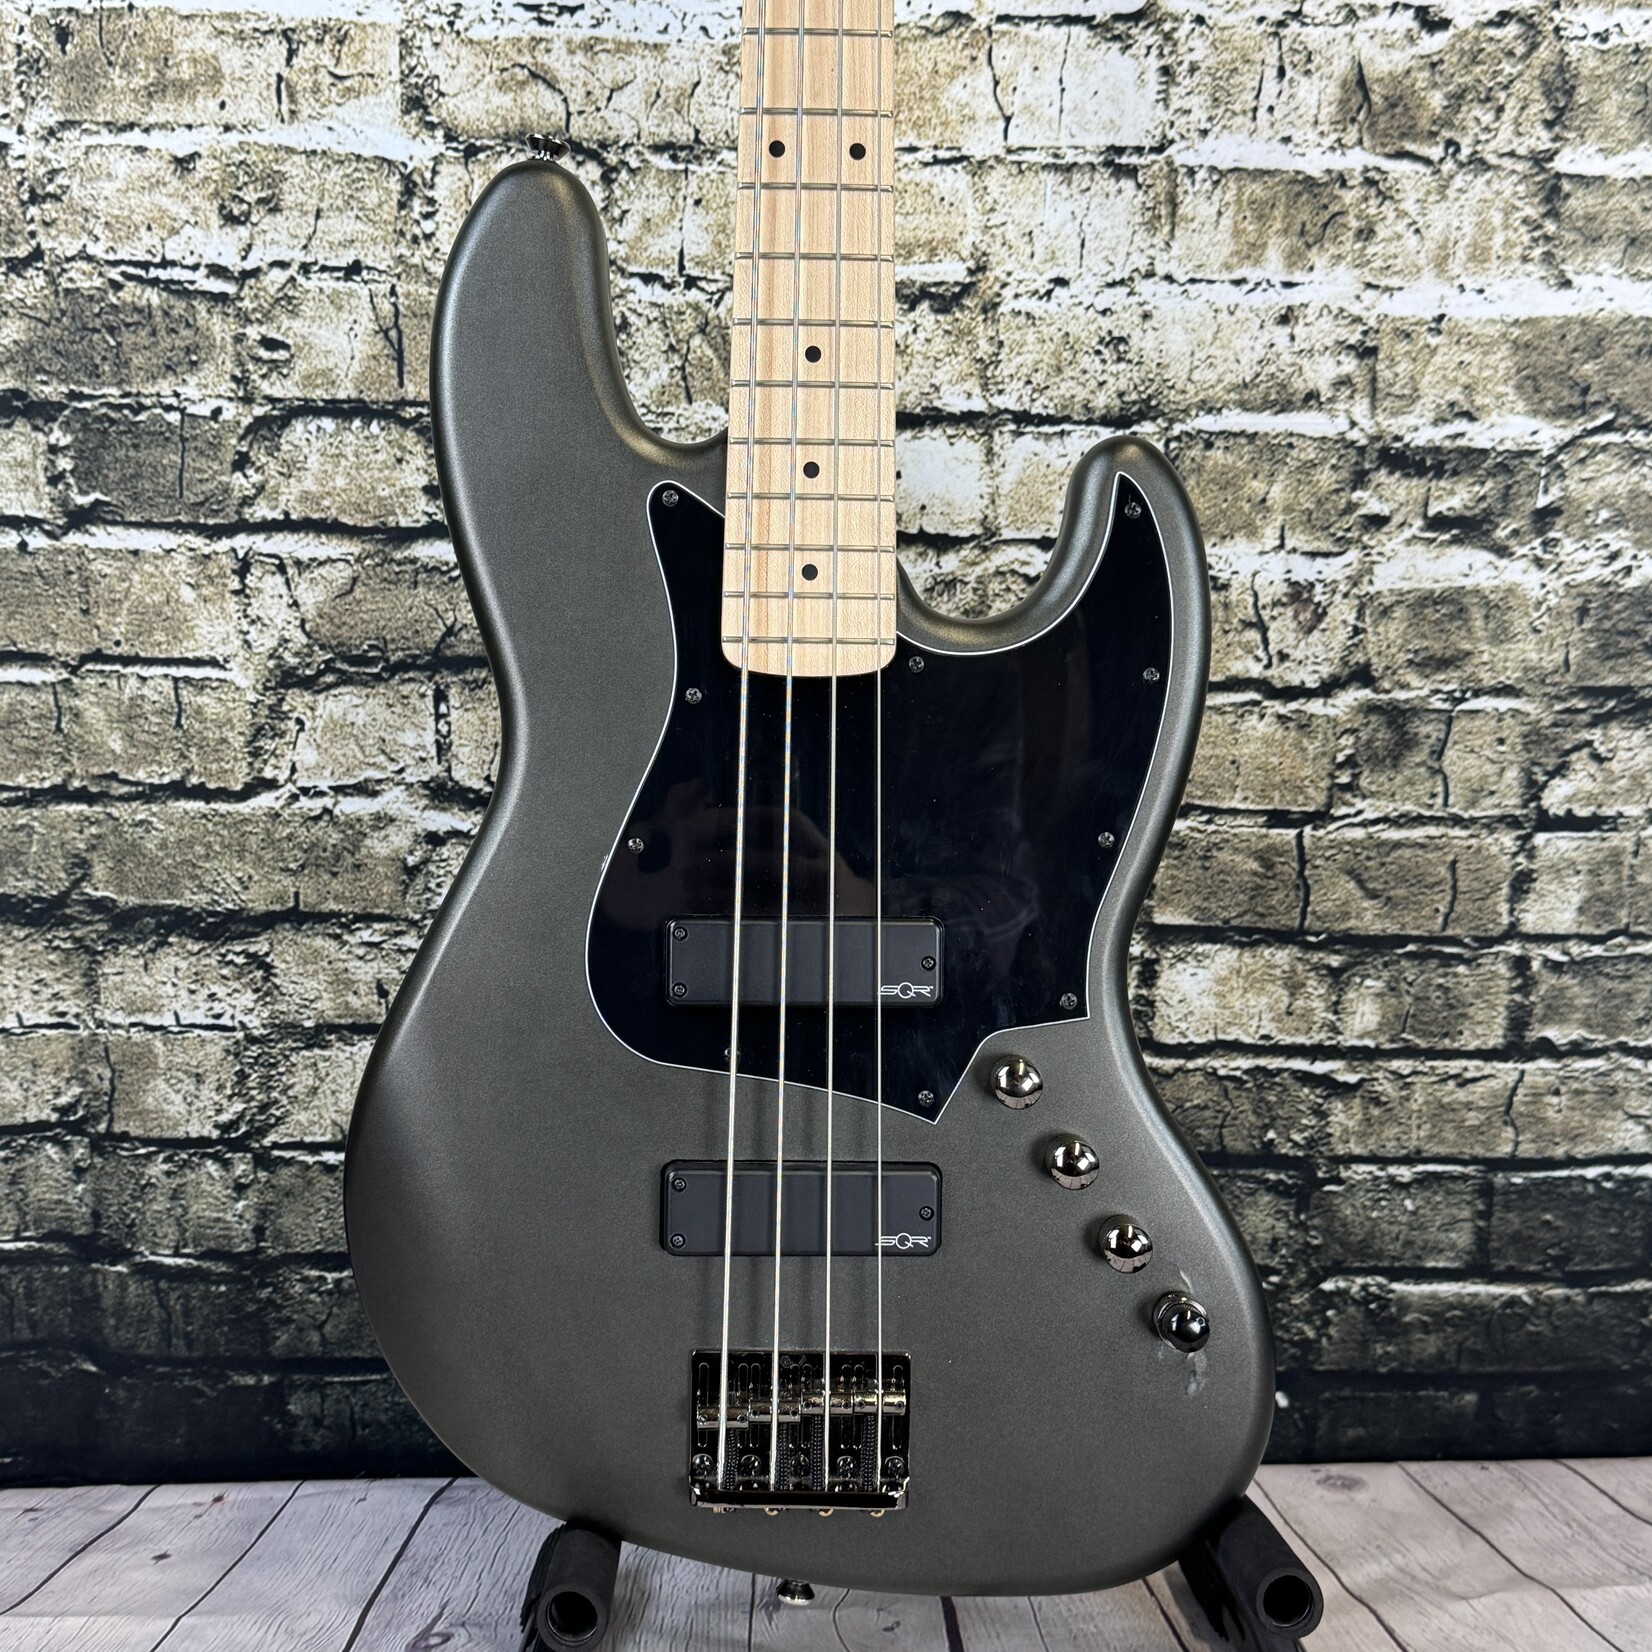 Squier Contemporary Active Jazz Bass HH Limited Edition - Satin Graphite Metallic (Used)